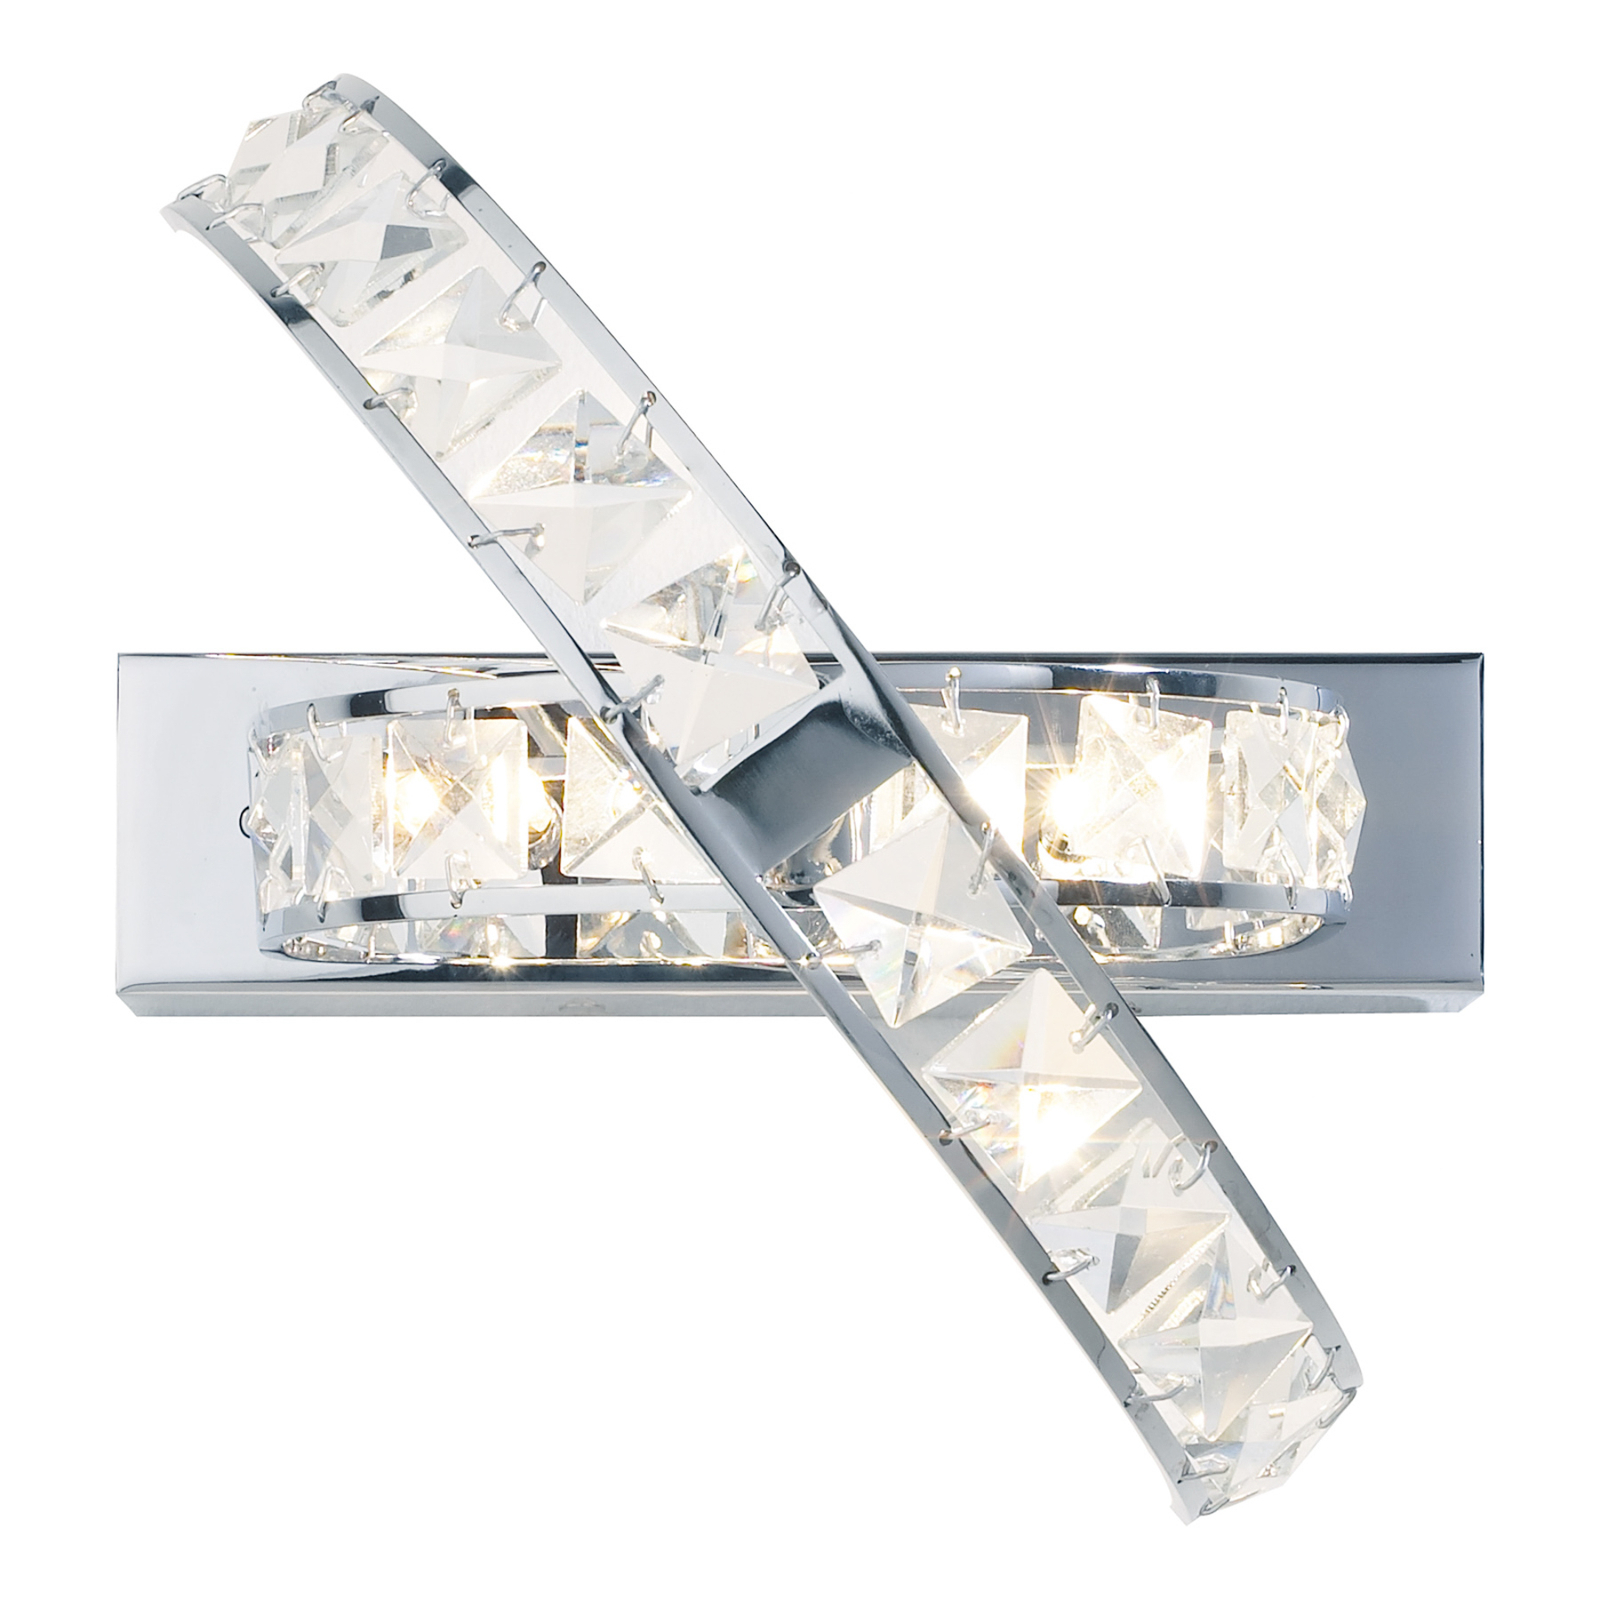 Eternity wall light with square crystals